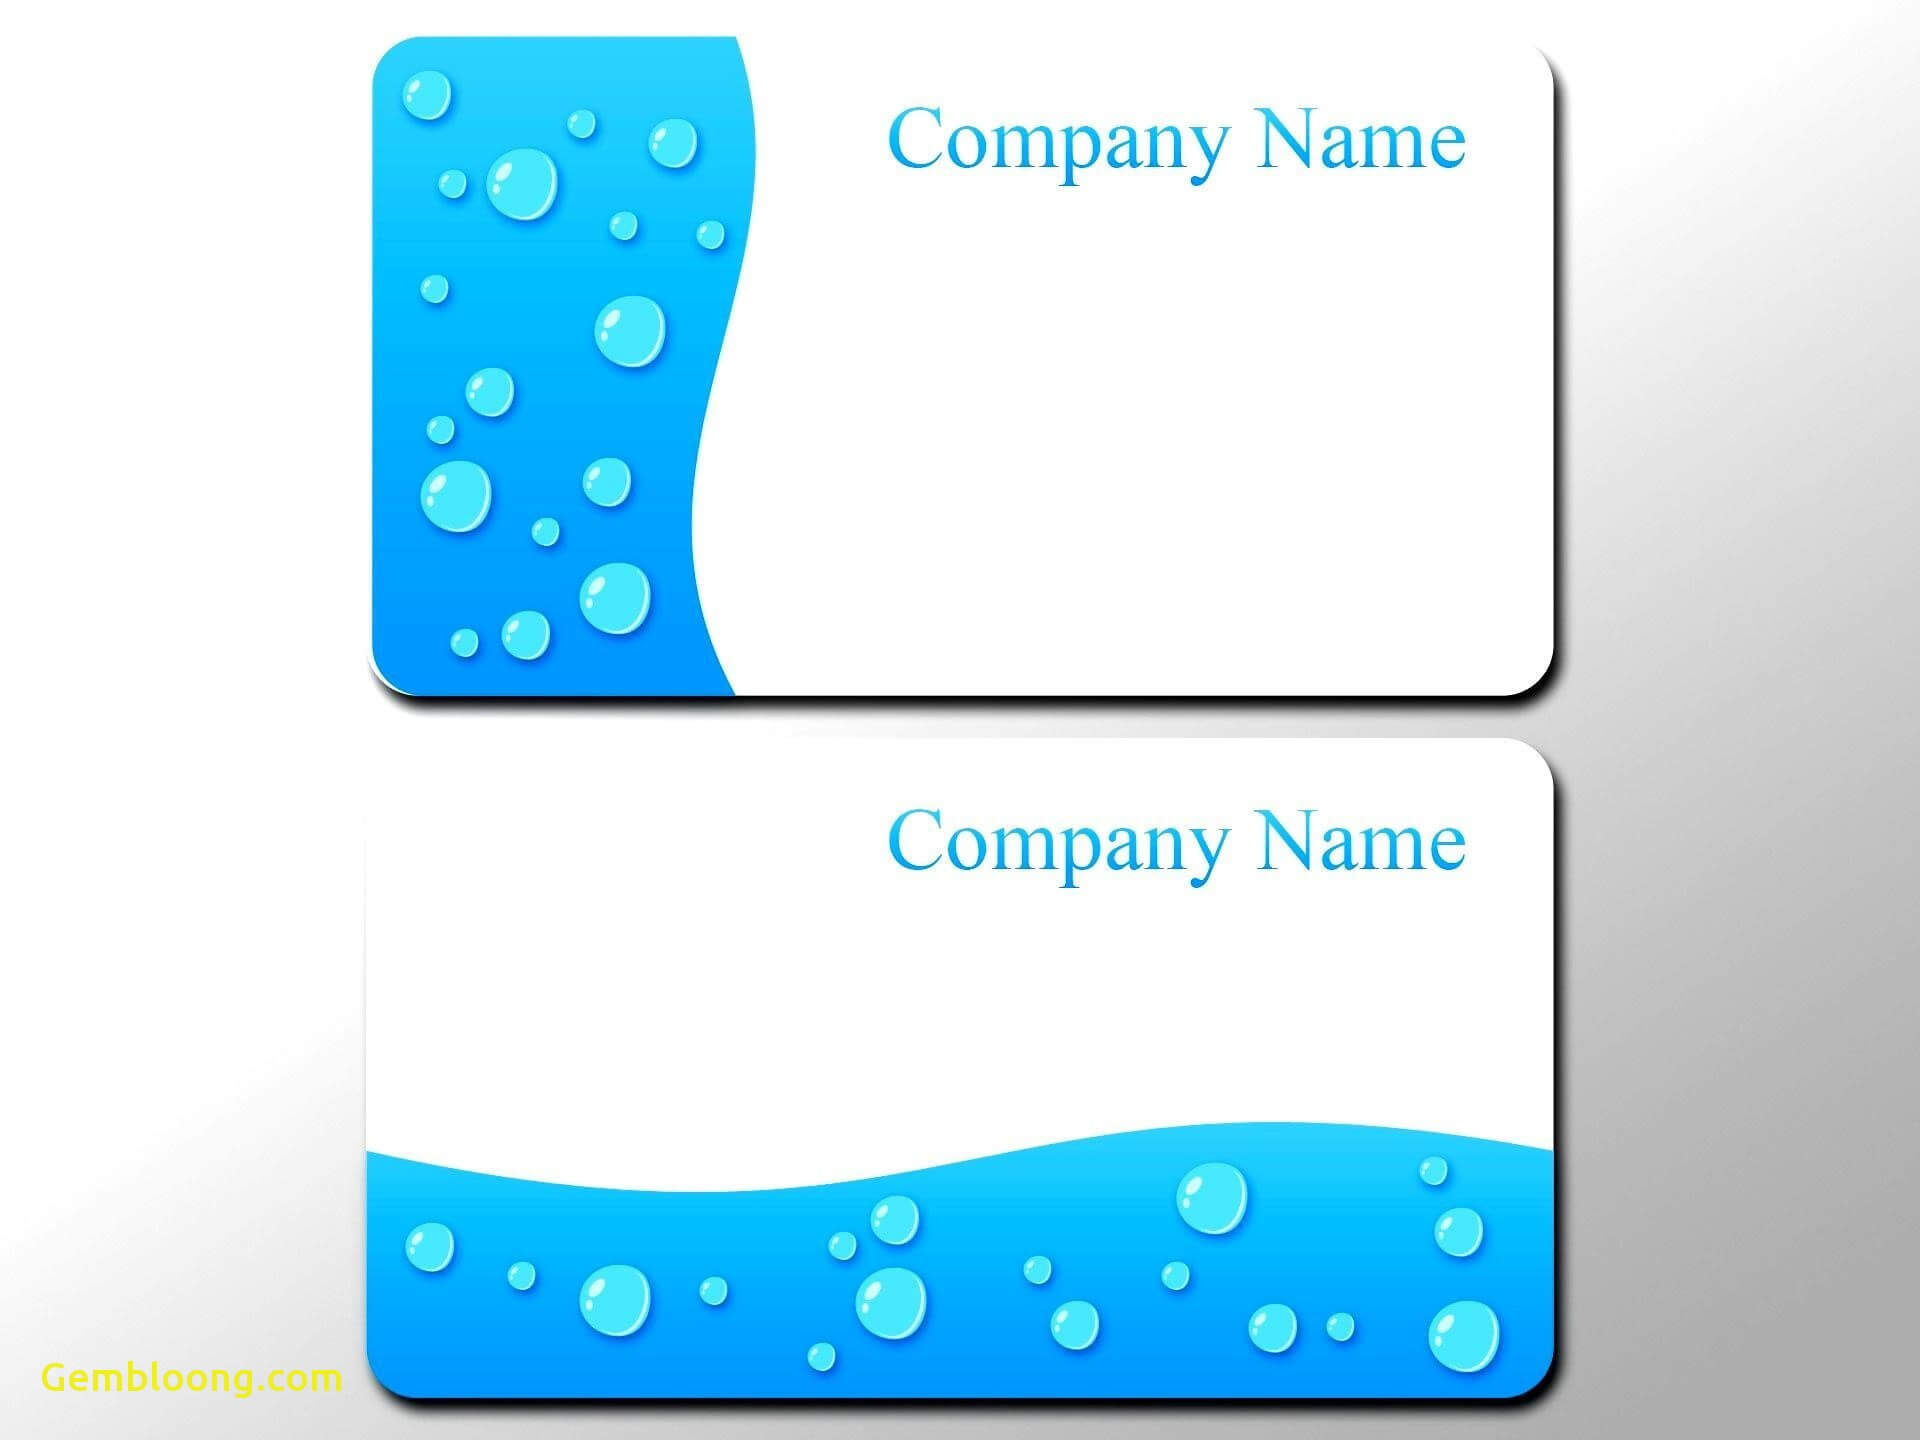 Business Card Photoshop Template Psd Awesome 016 Business With Plain Business Card Template